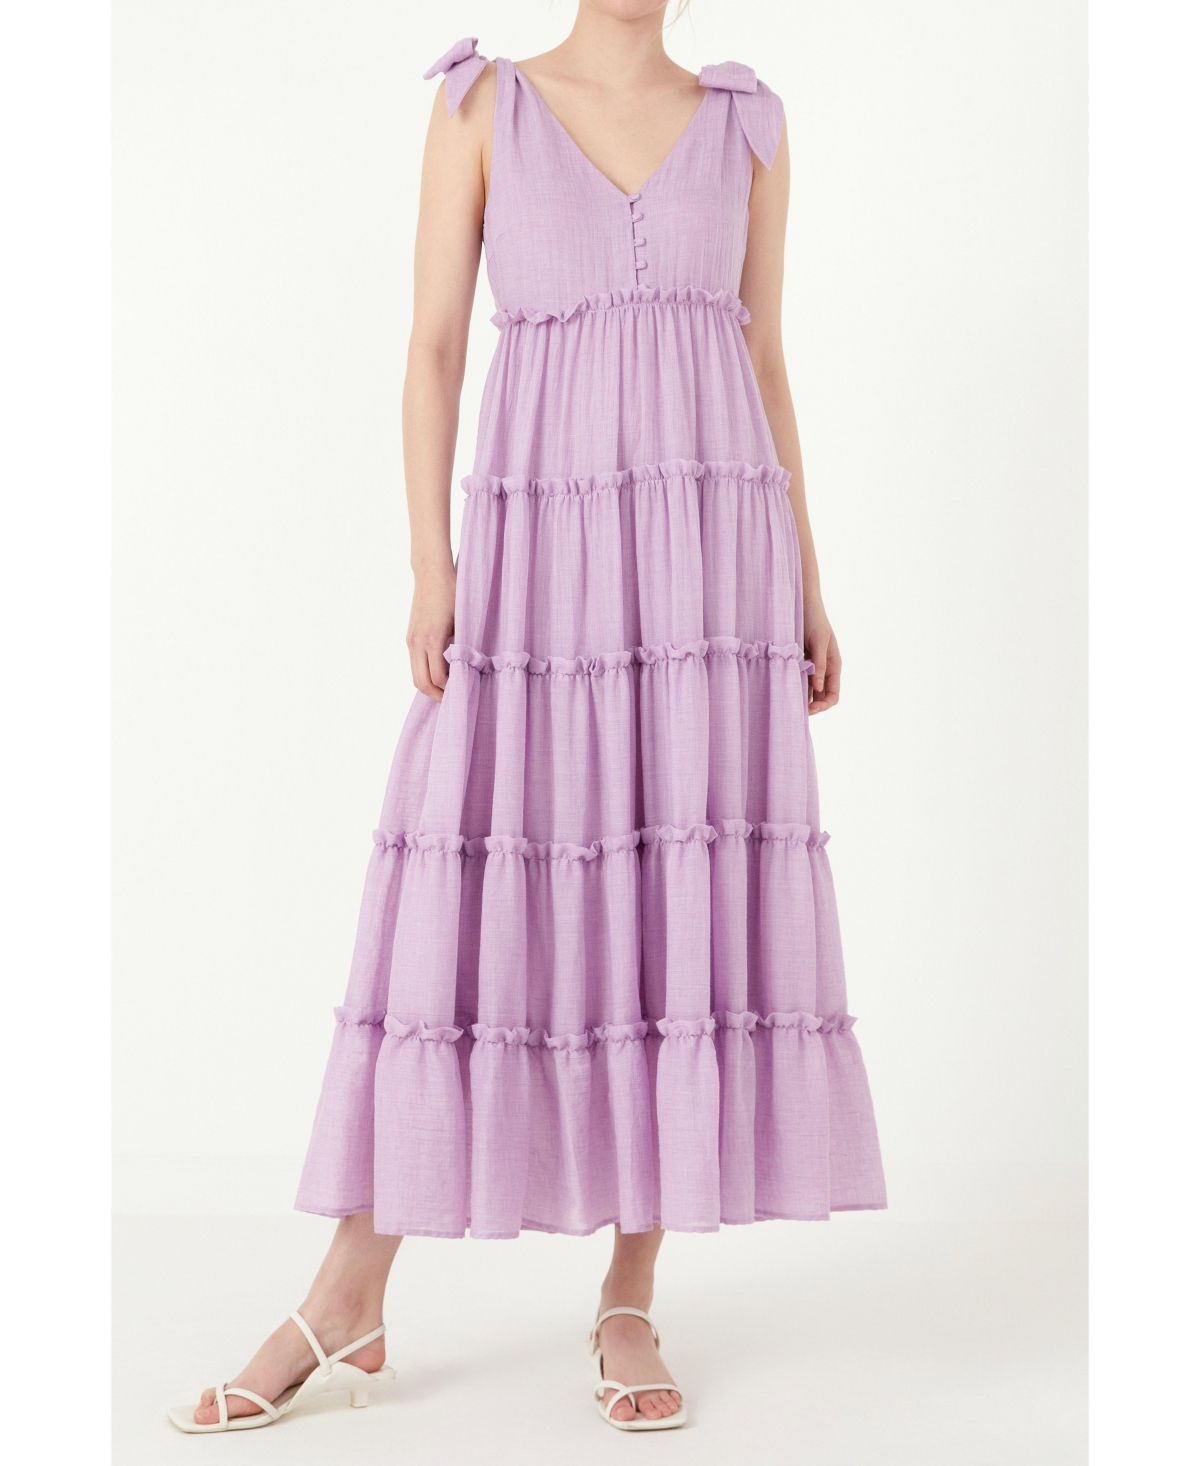 Free The Roses Women's Tiered Maxi Dress